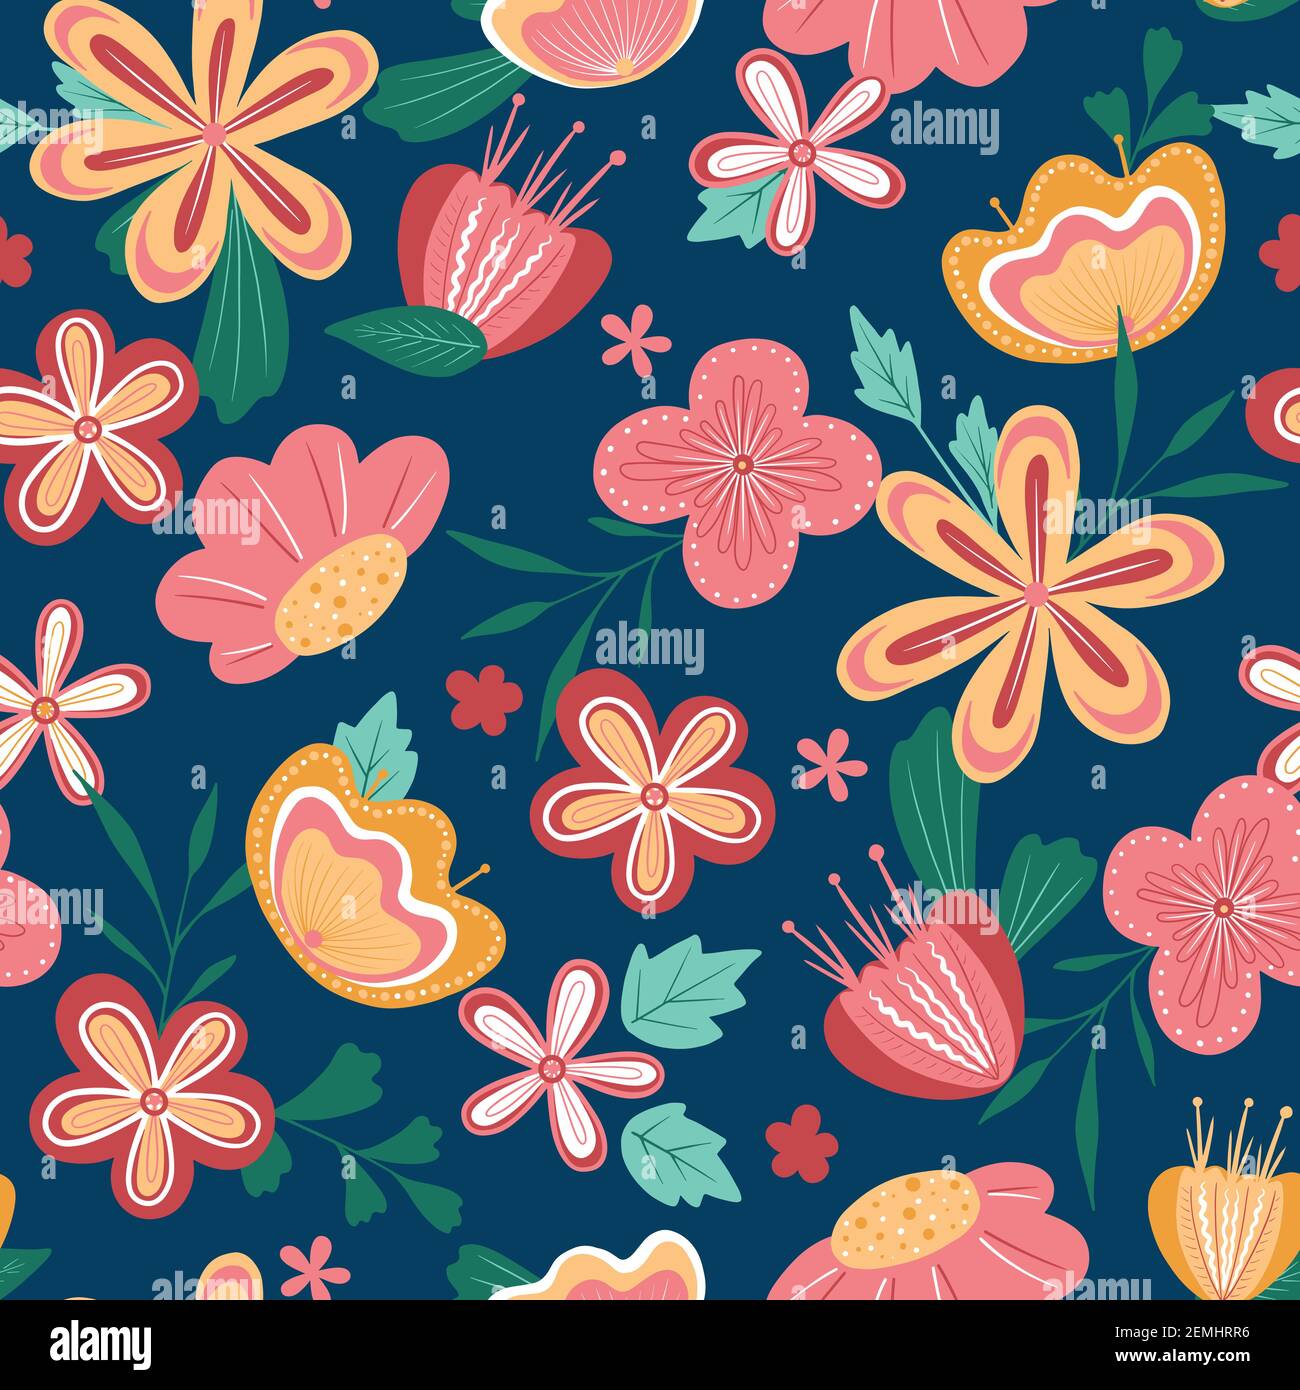 Painted colorful flowers, seamless vector background. bright stylized flowers on a dark background. Stock Vector